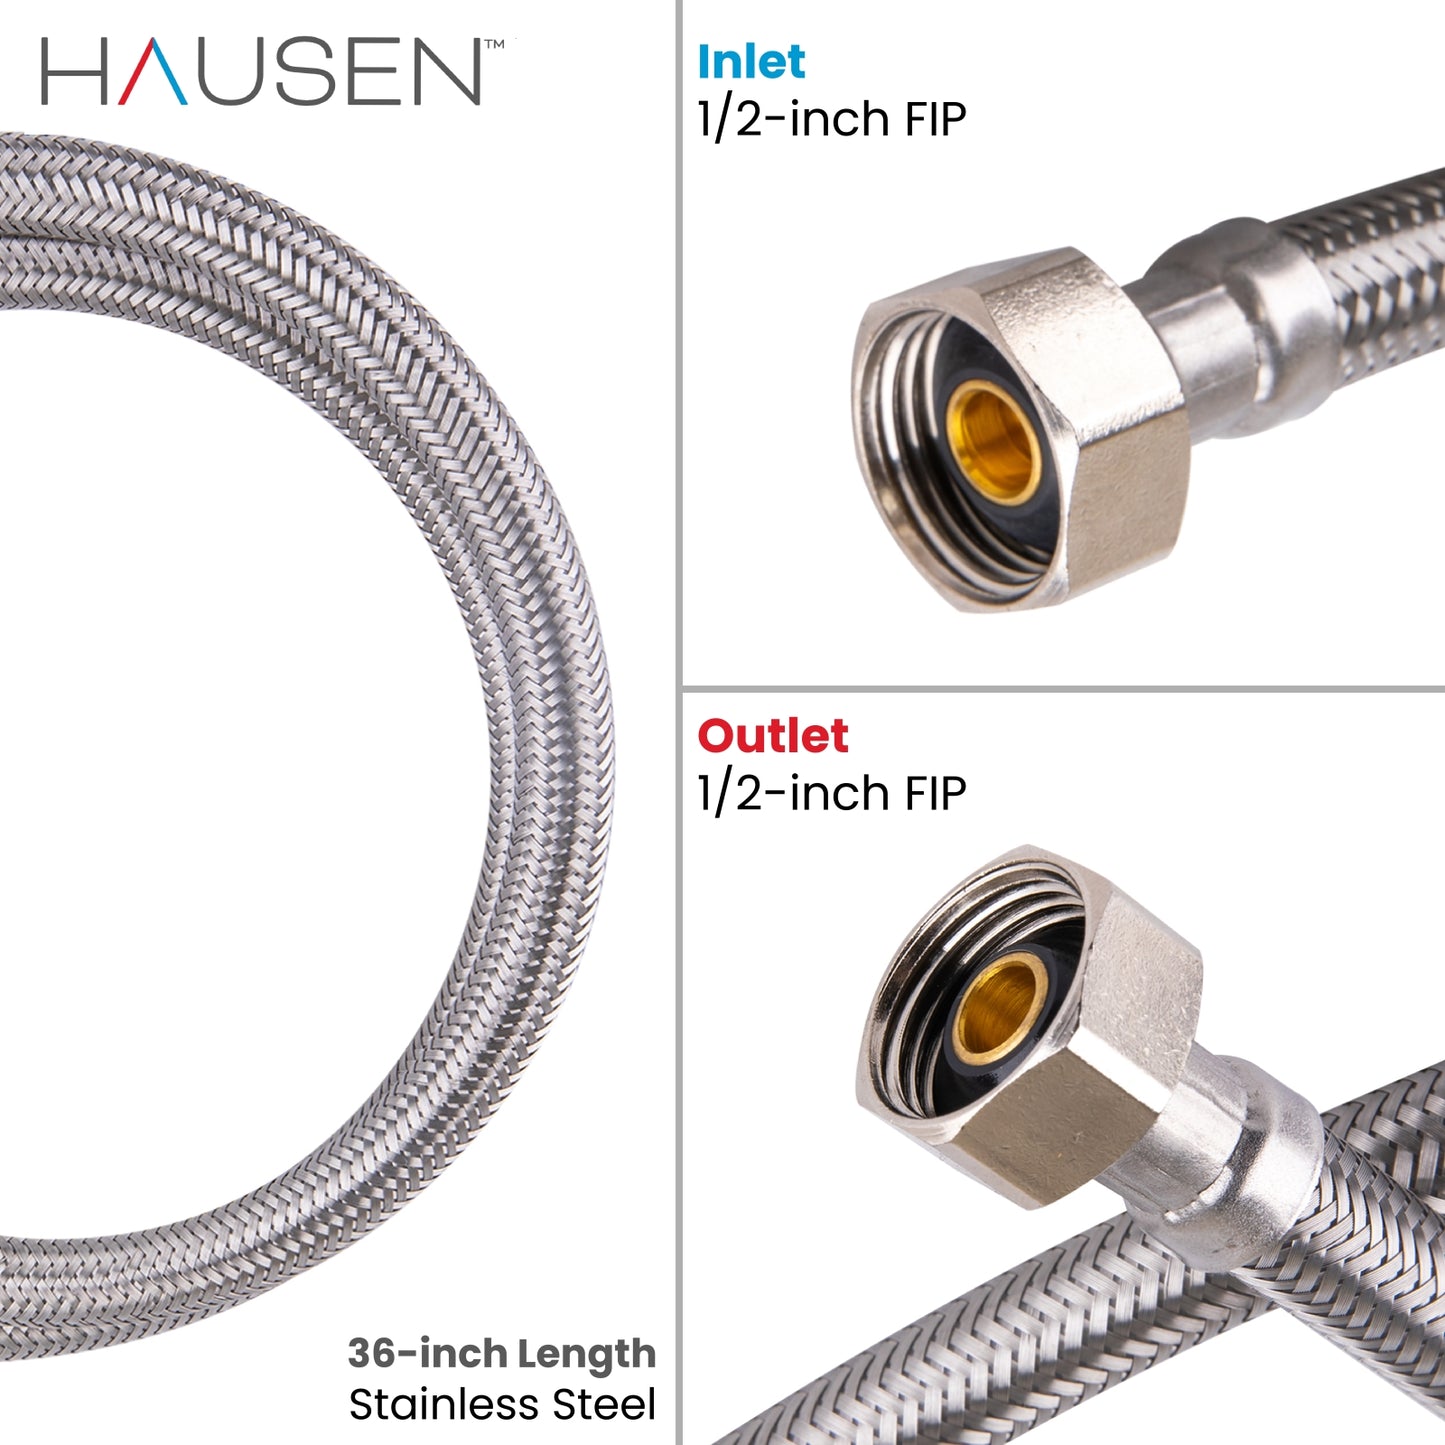 Hausen 1/2-inch FIP (Female Iron Pipe) x 1/2-inch FIP (Female Iron Pipe) x 36-inch Length Stainless Steel Faucet Water Supply Connector; Lead Free; Compatible with Standard Faucets, 2-Pack